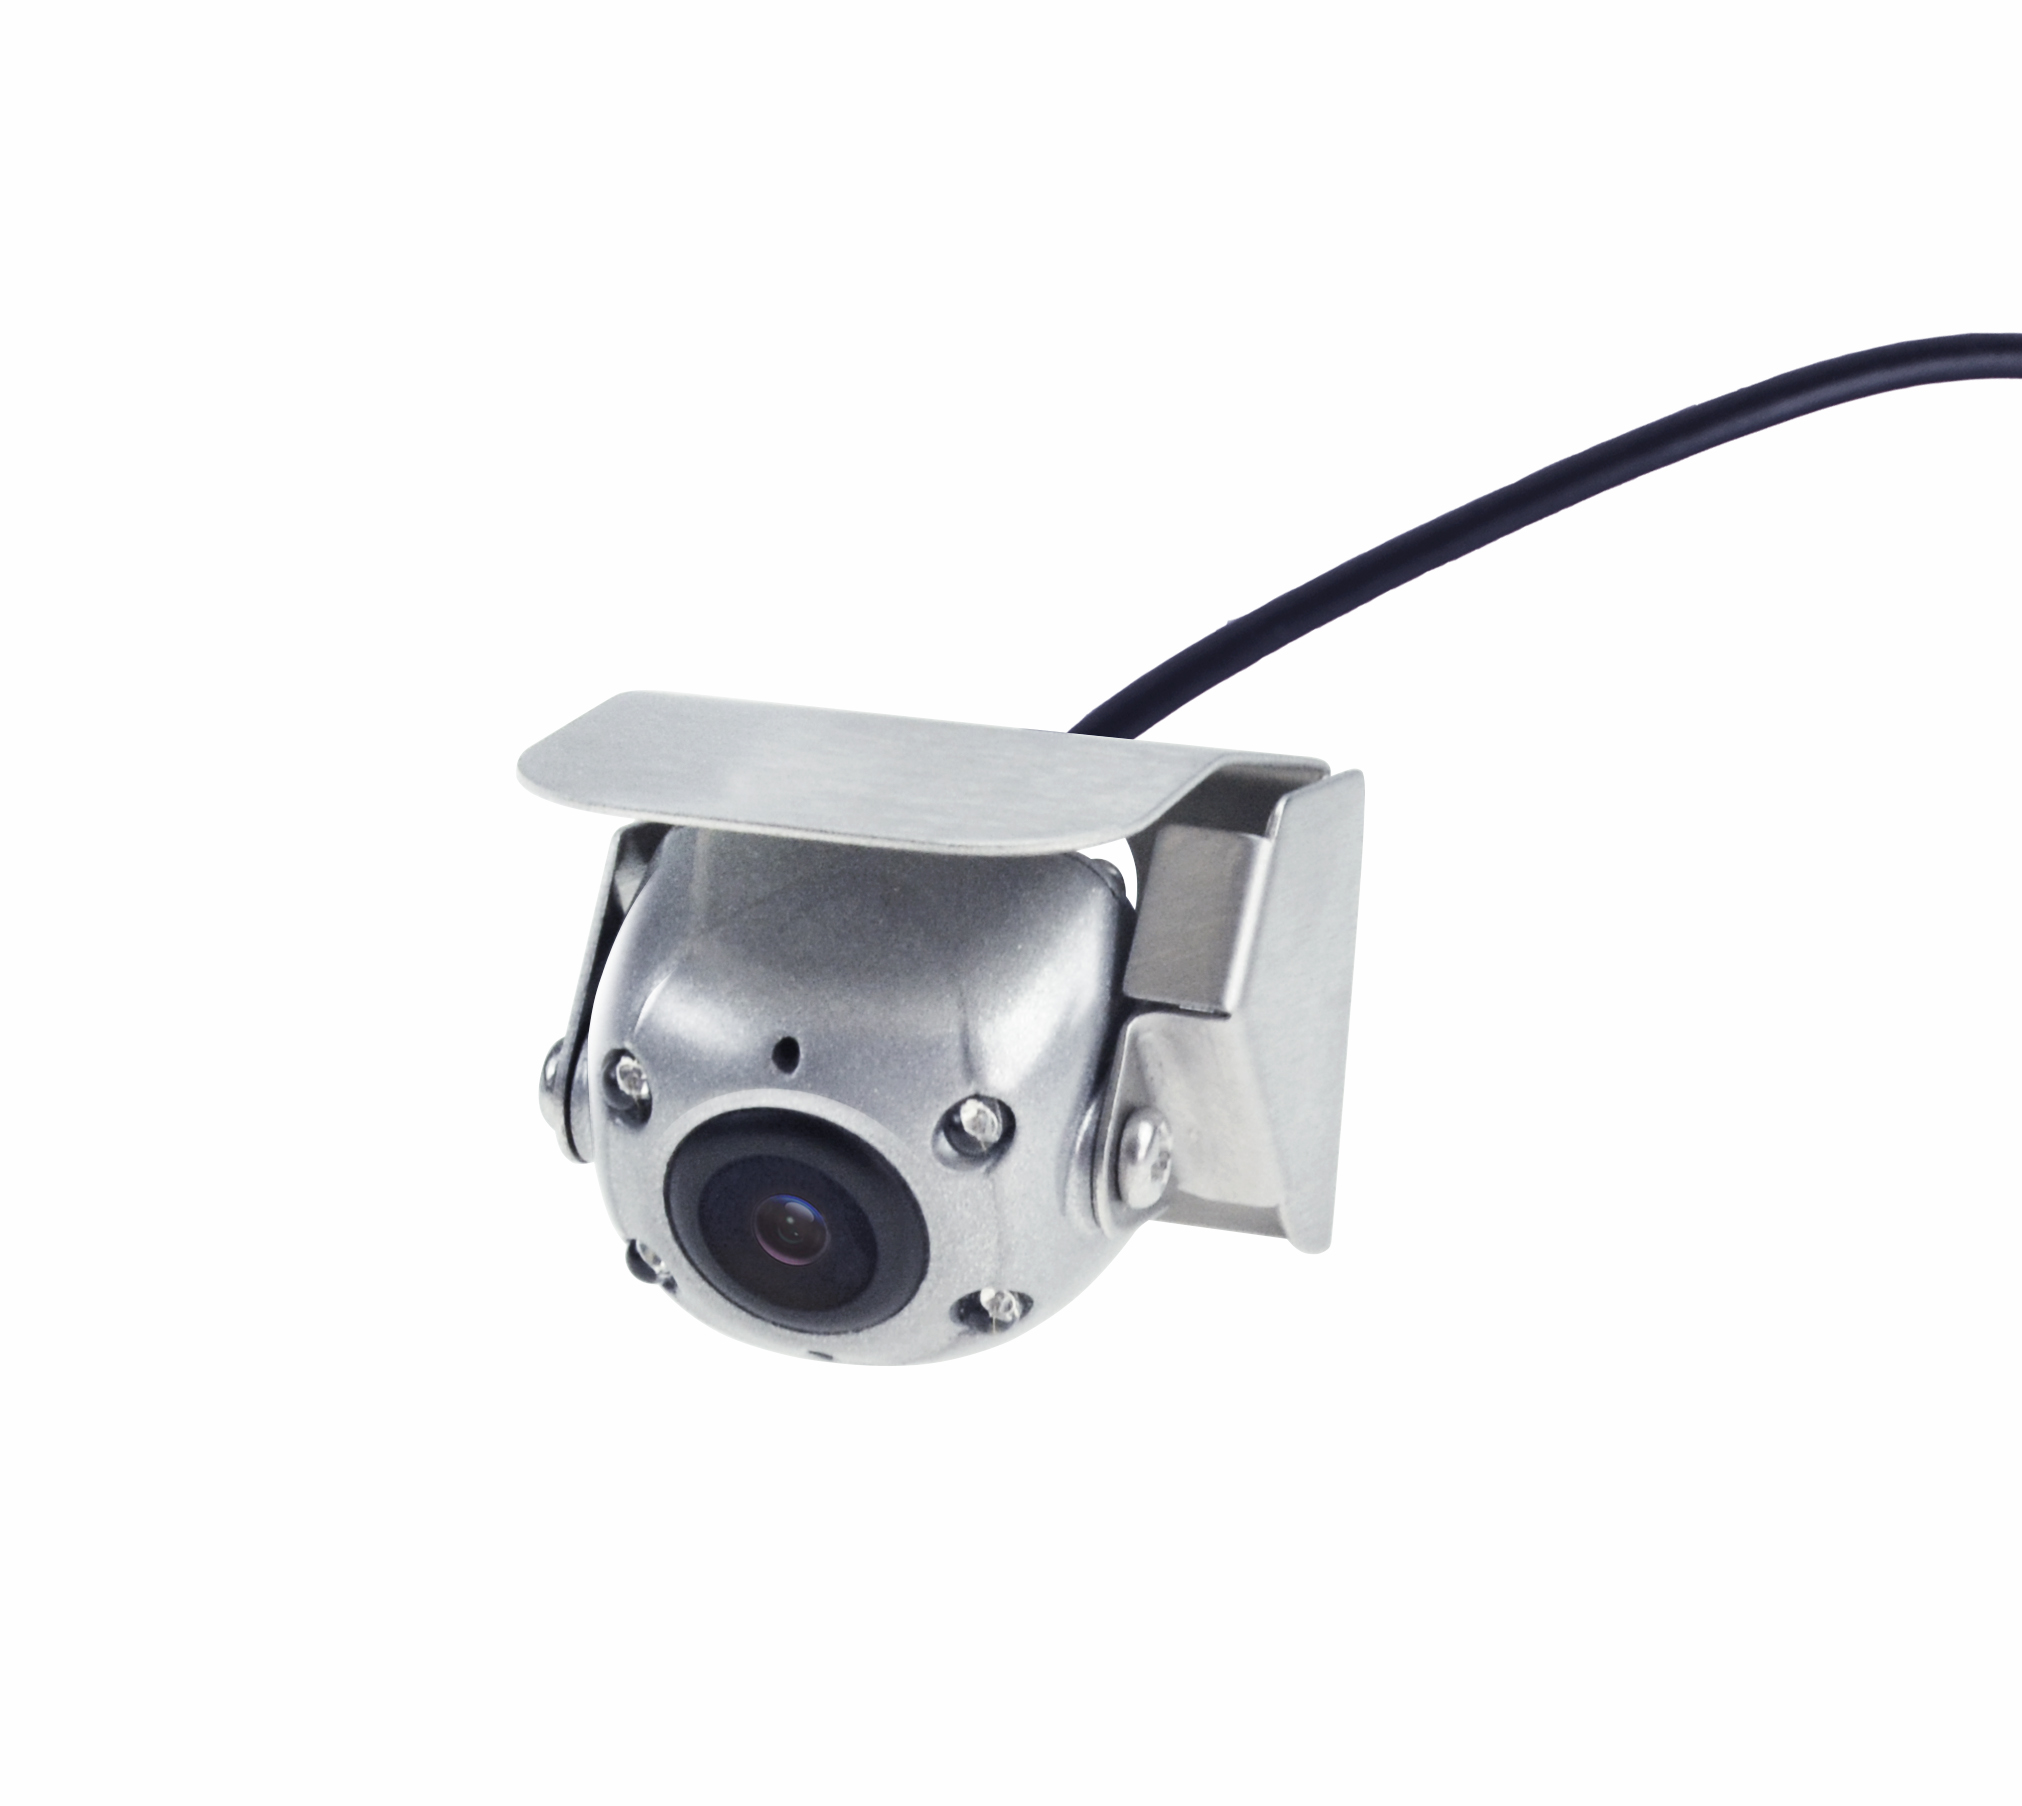 BR-MNC10  MINI Size wide angle camera with stainless steel housing.